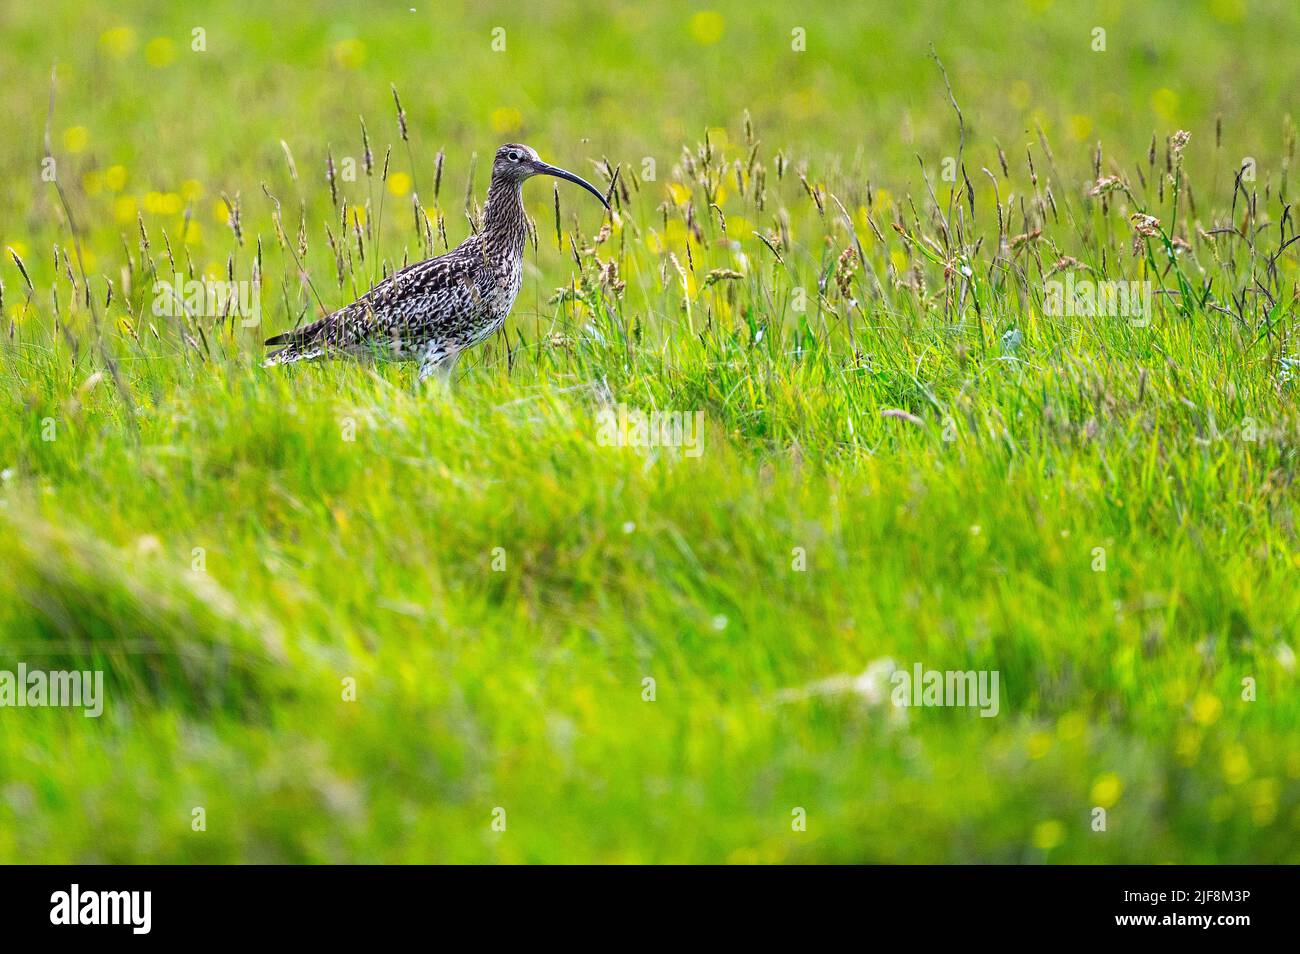 Un curlew foraging nelle erbe lunghe, Eday, Isole Orkney Foto Stock